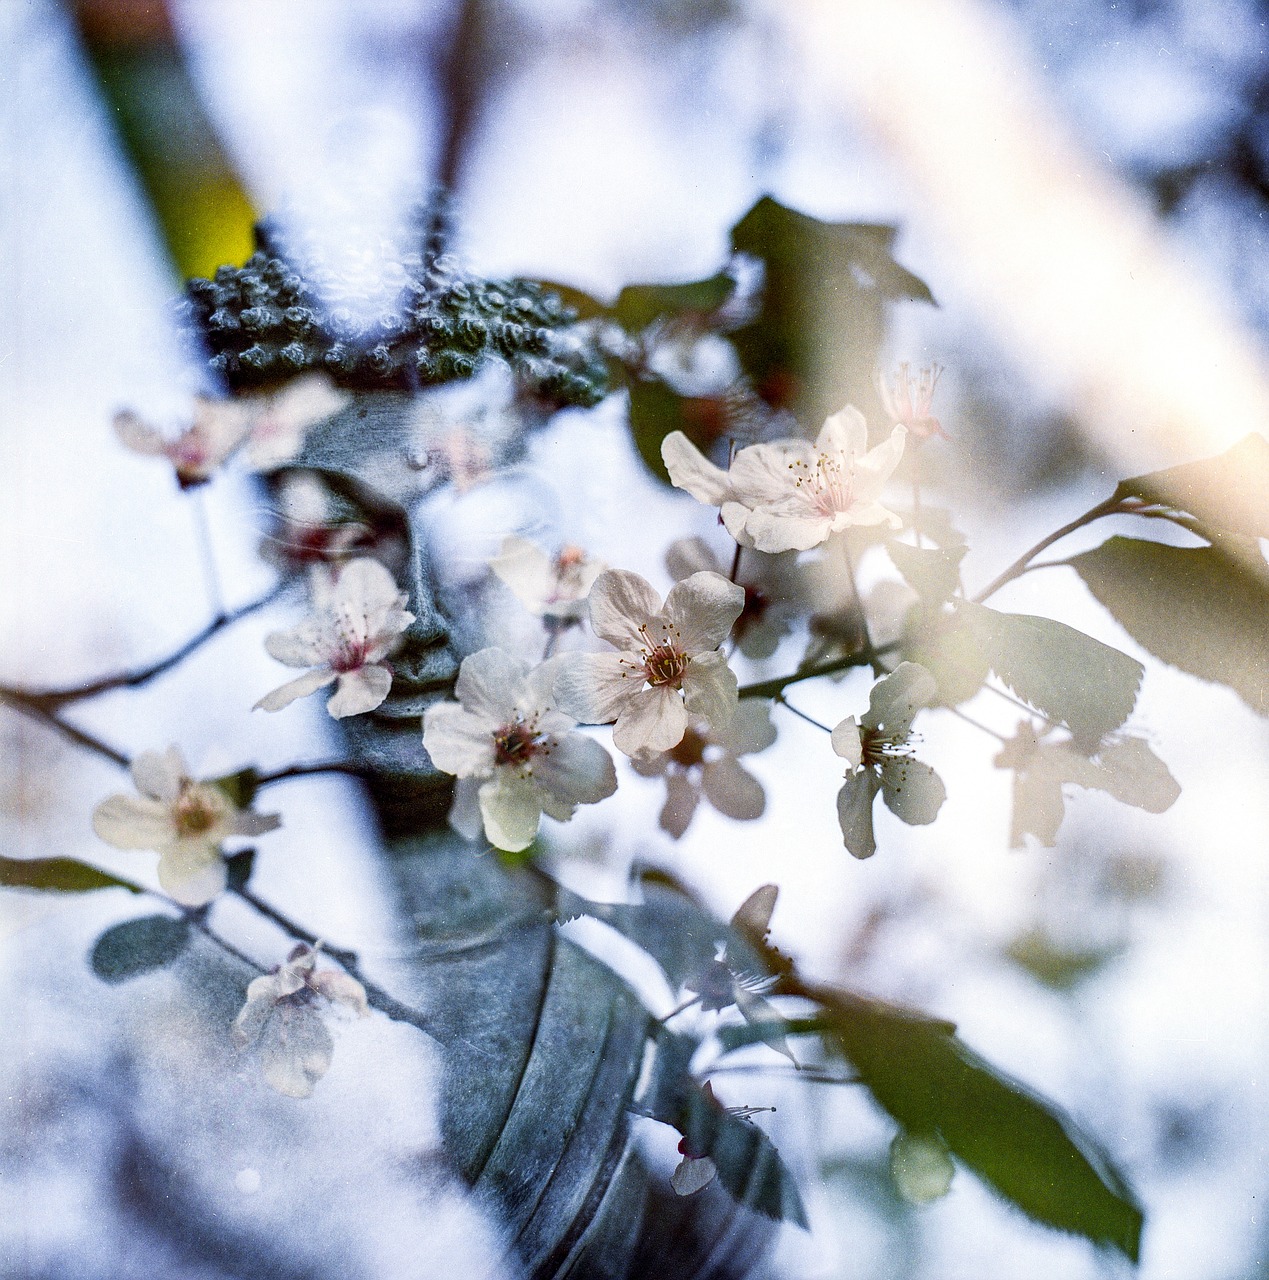 a close up of a vase with flowers in it, a picture, art photography, cherry blossom forest, 35mm double-exposure photo, bokeh. iridescent accents, on a planet of lush foliage